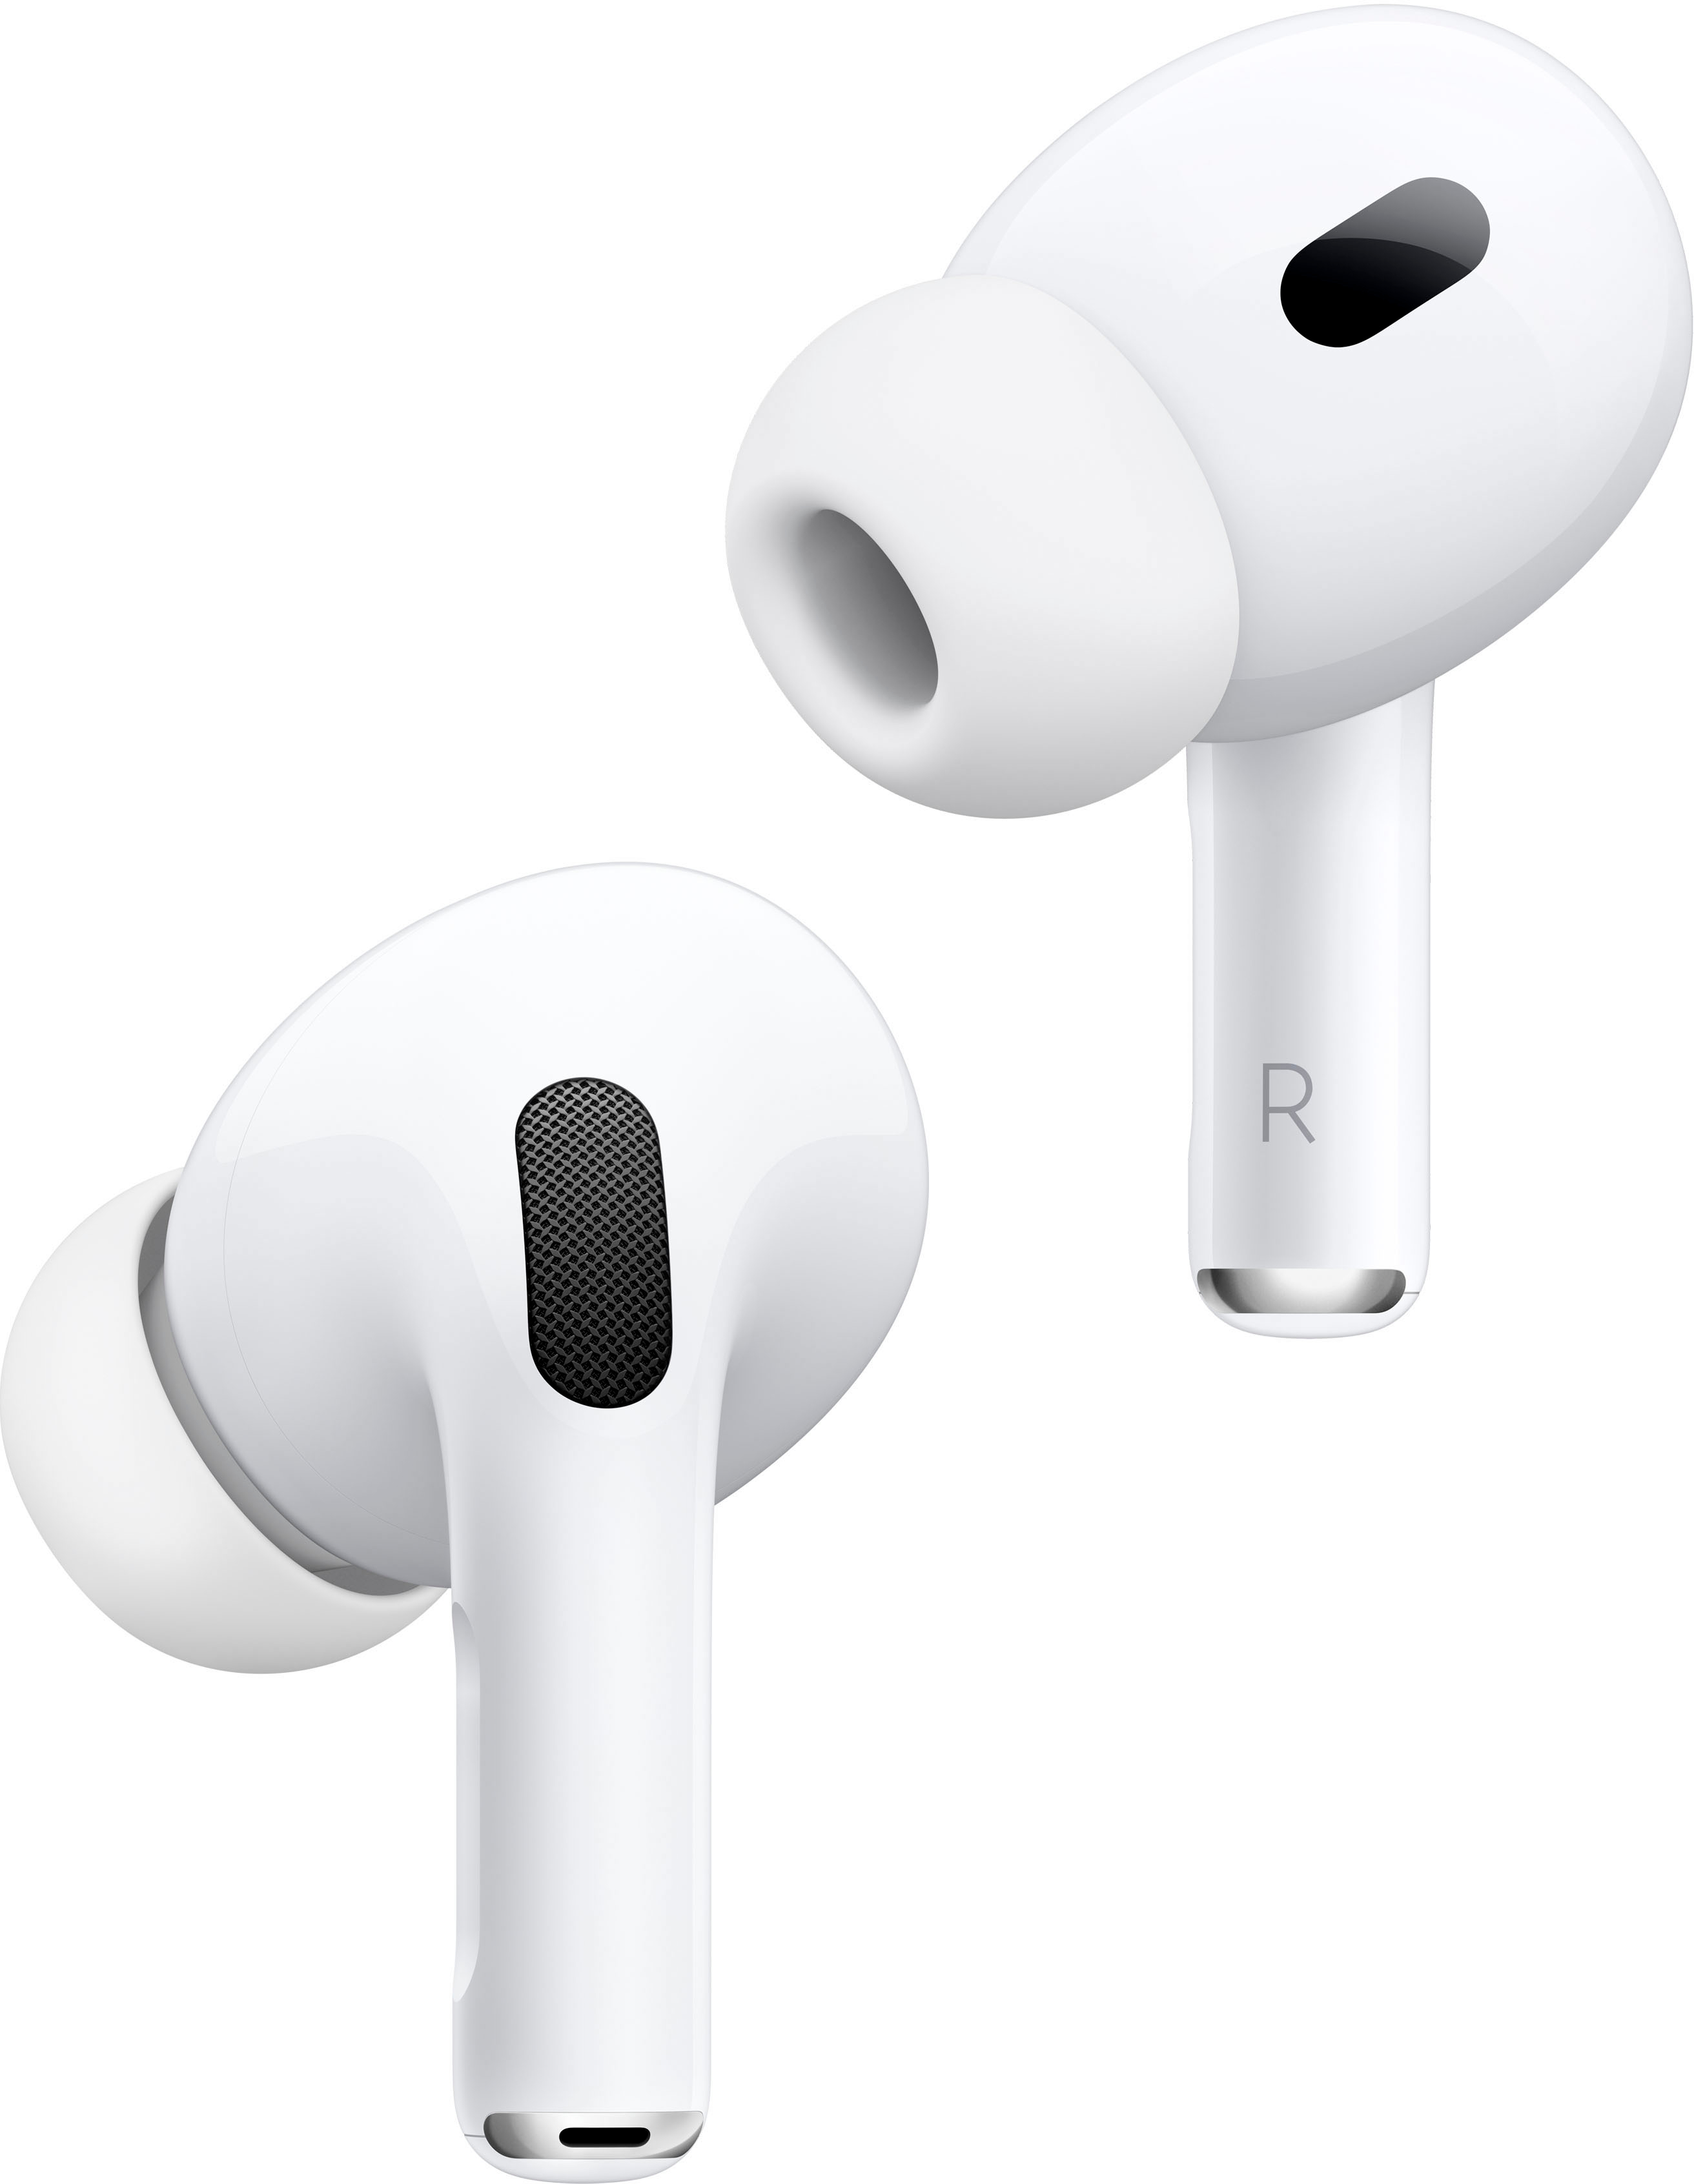 Apple Geek Squad Certified Refurbished AirPods Pro (2nd generation 